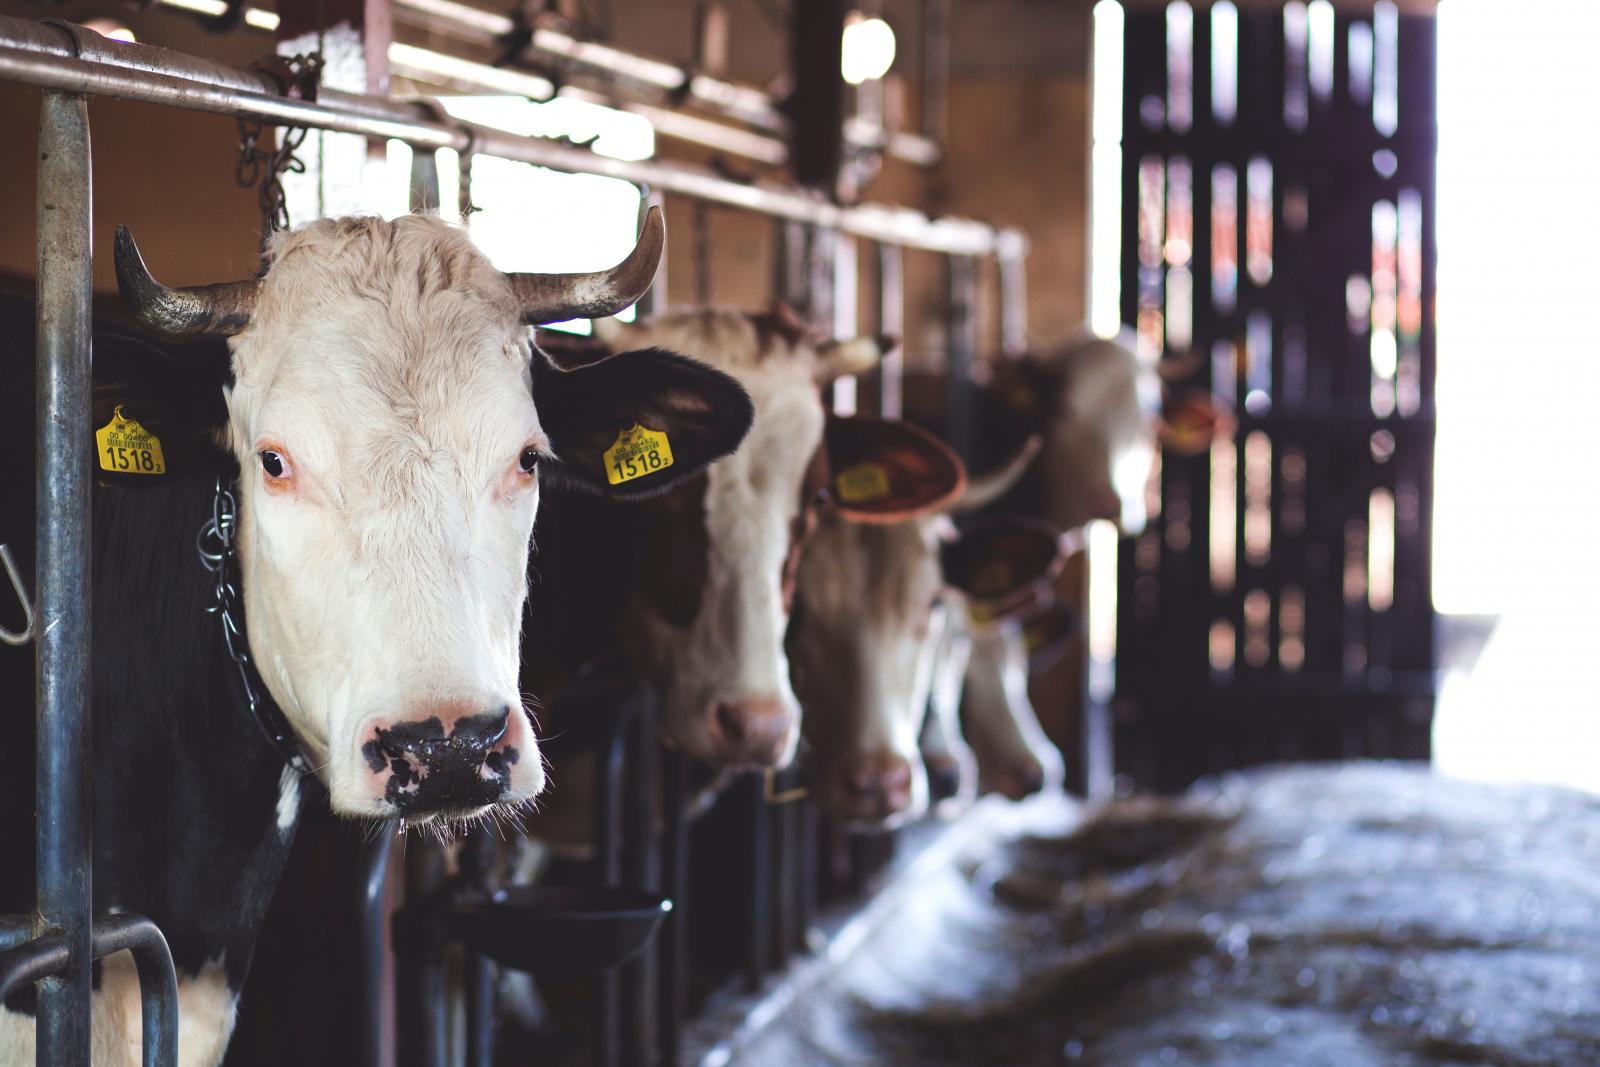 Cattle in cowshed. Photo credit: pexels